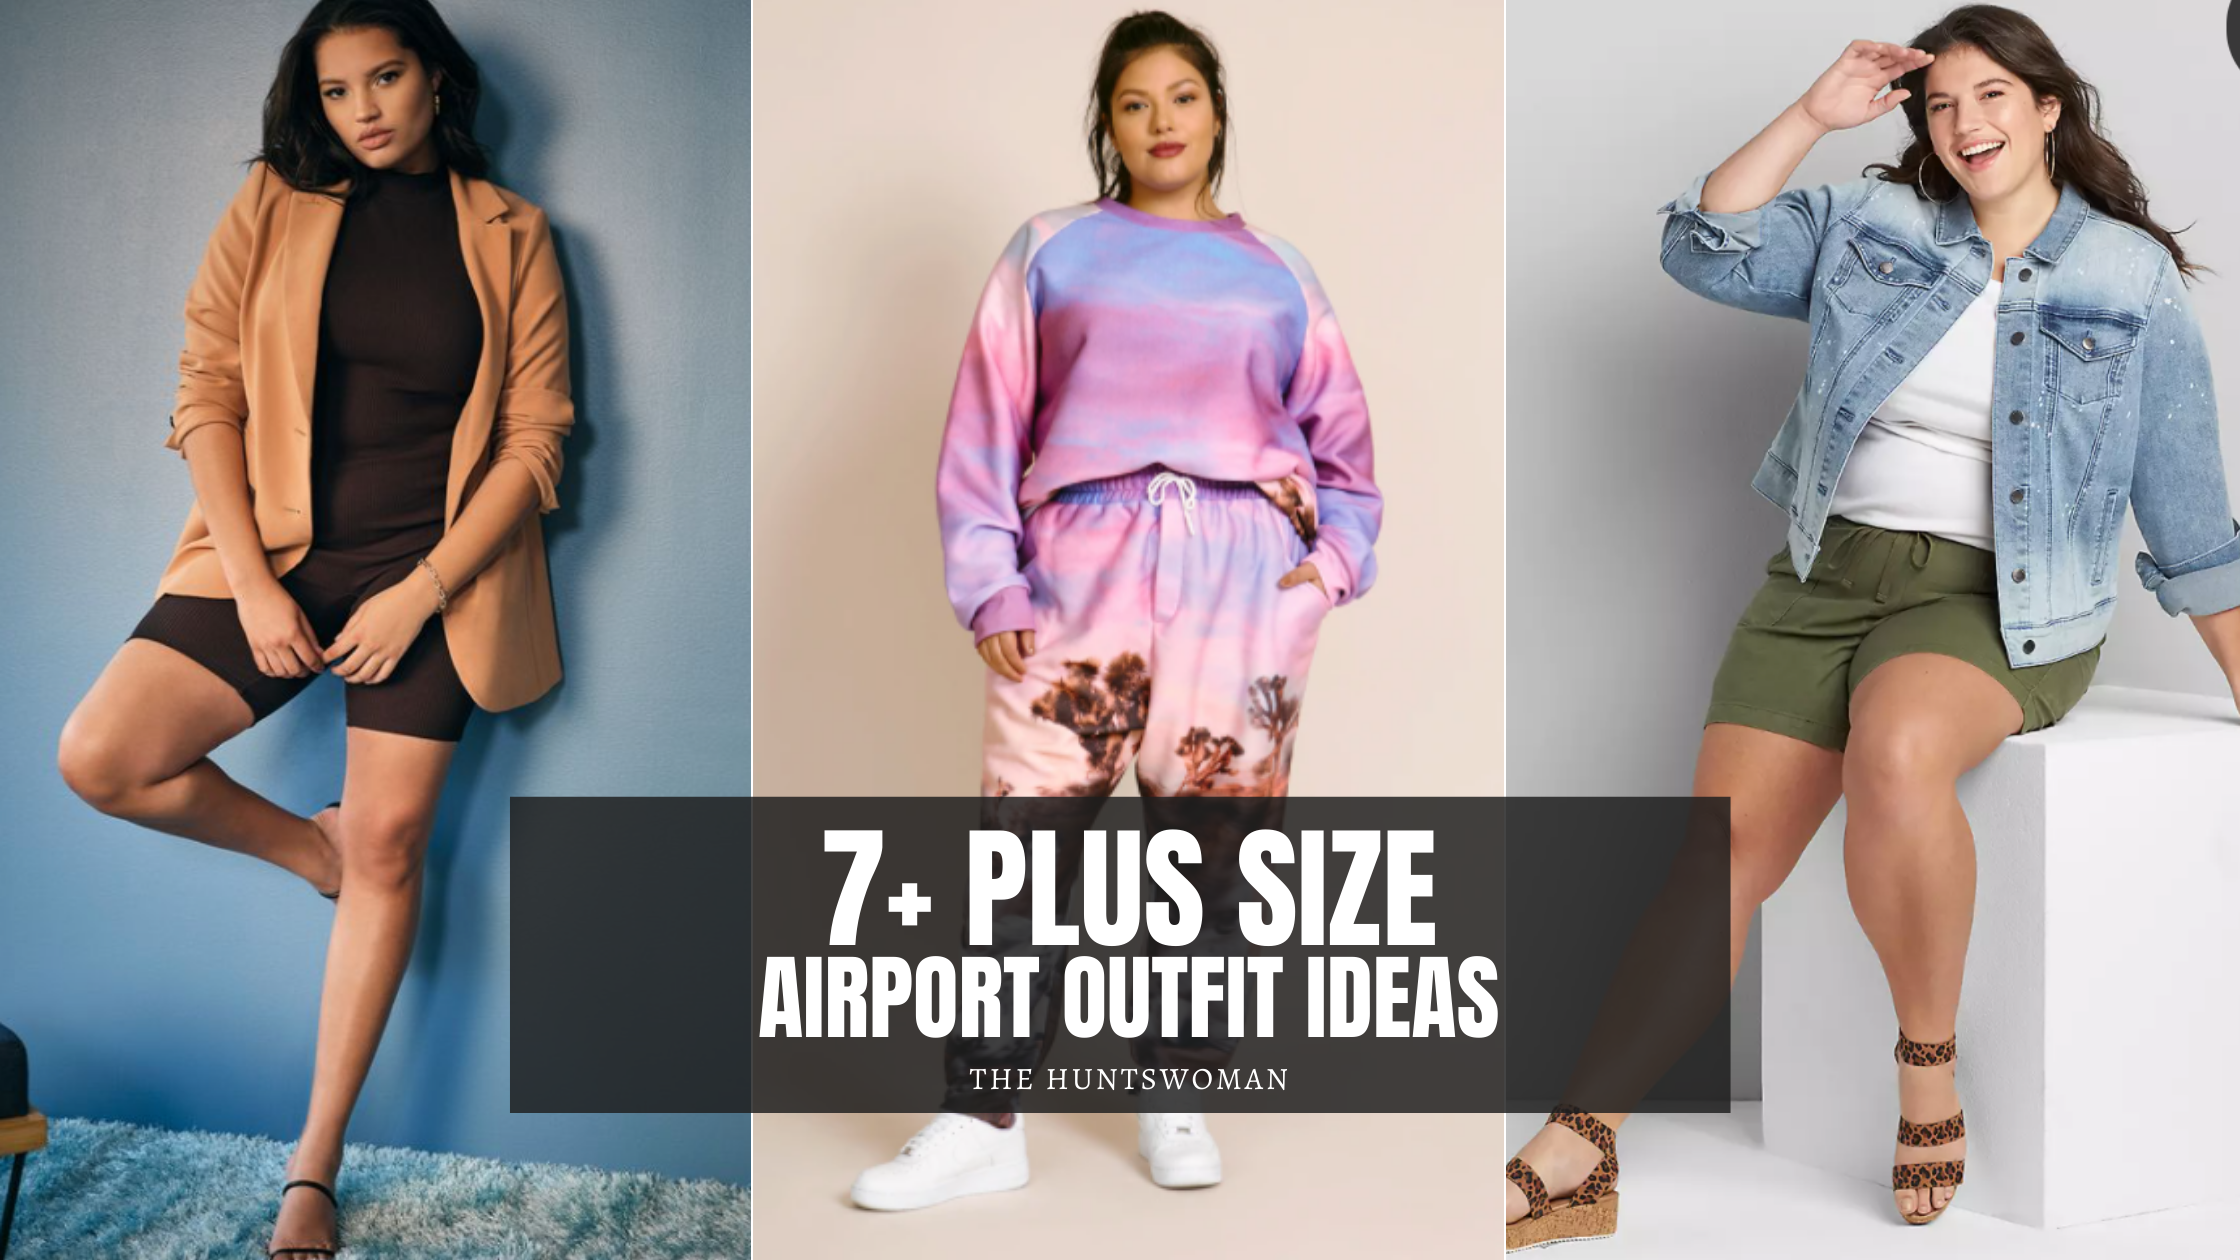 17+ Plus Size Airport Outfits  Traveling While Plus Size - The Huntswoman